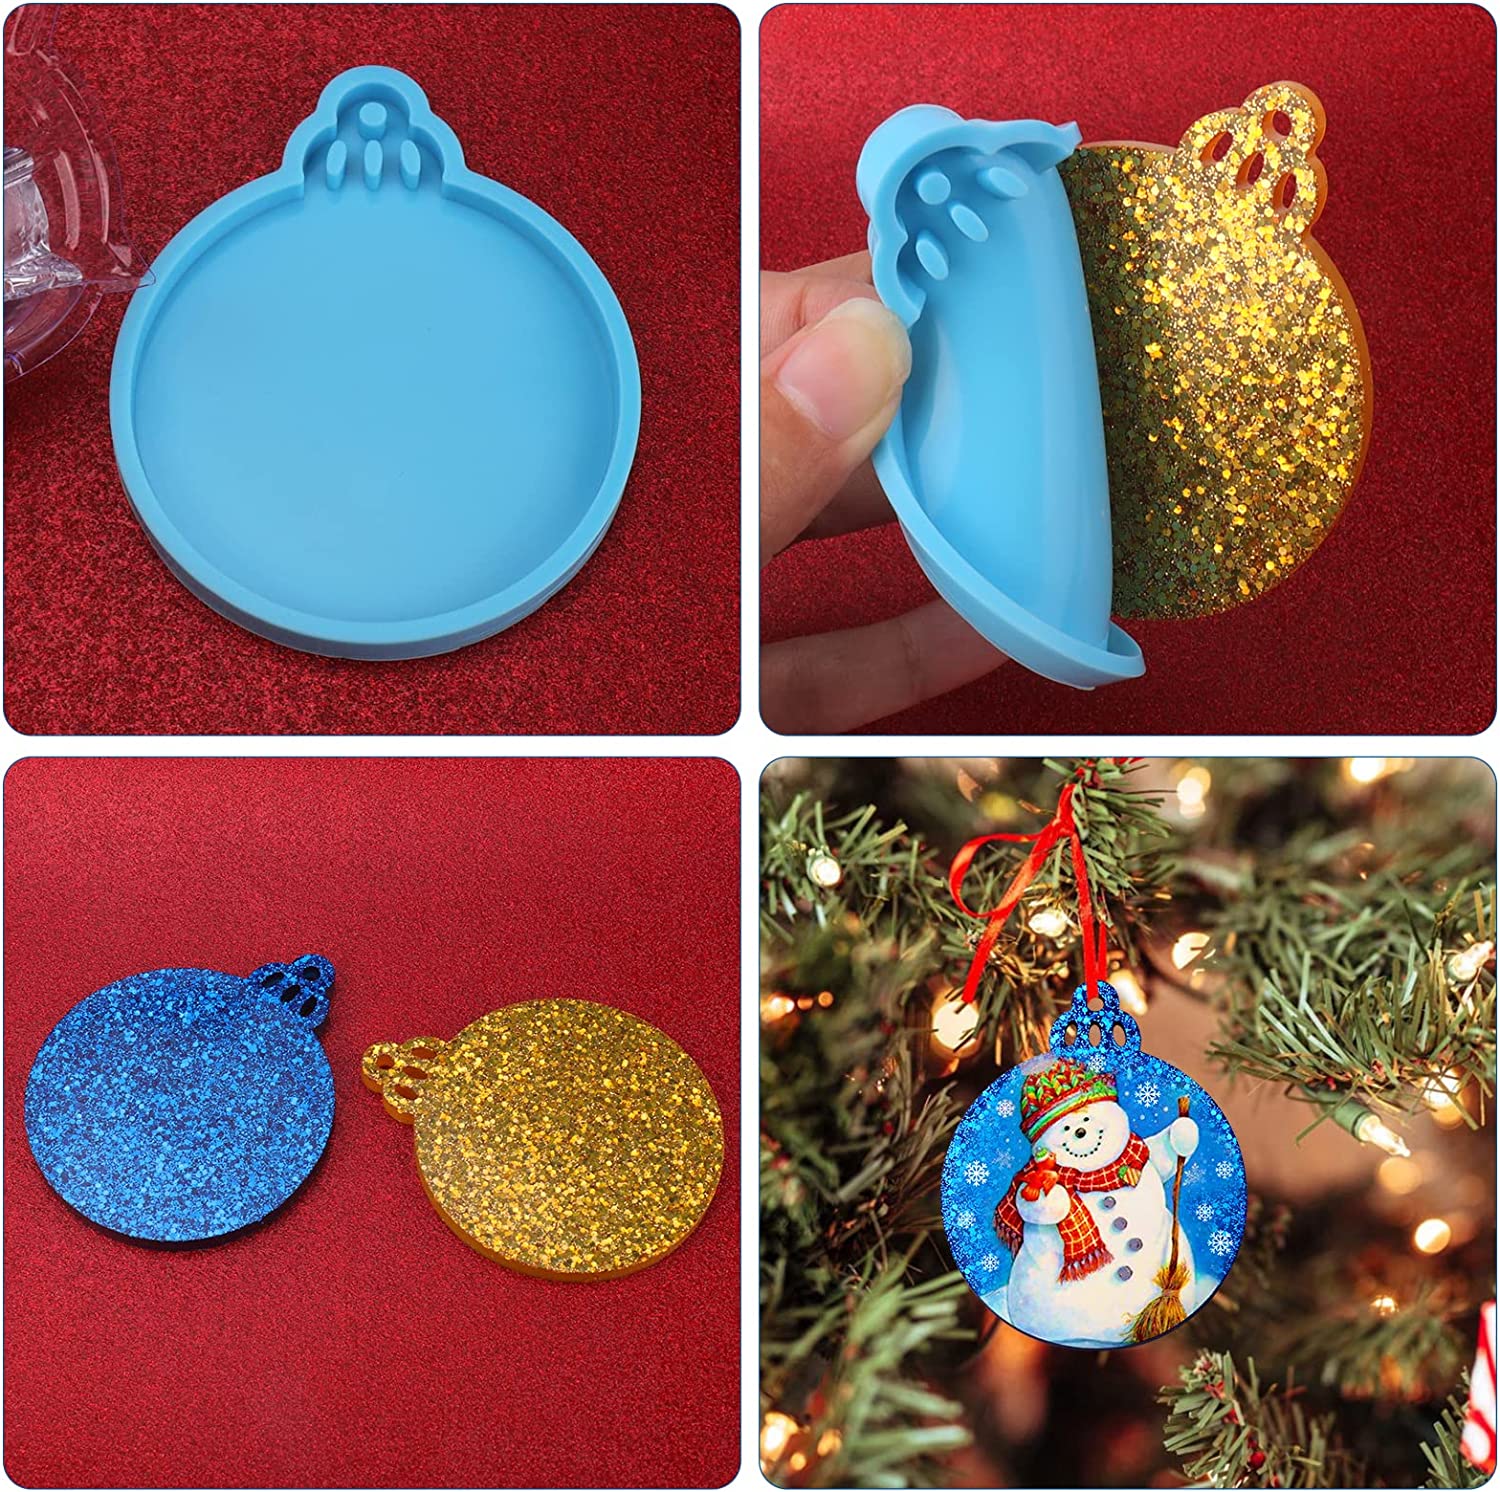 Products for parties and events, Christmas molds, shapes for Easter, sale